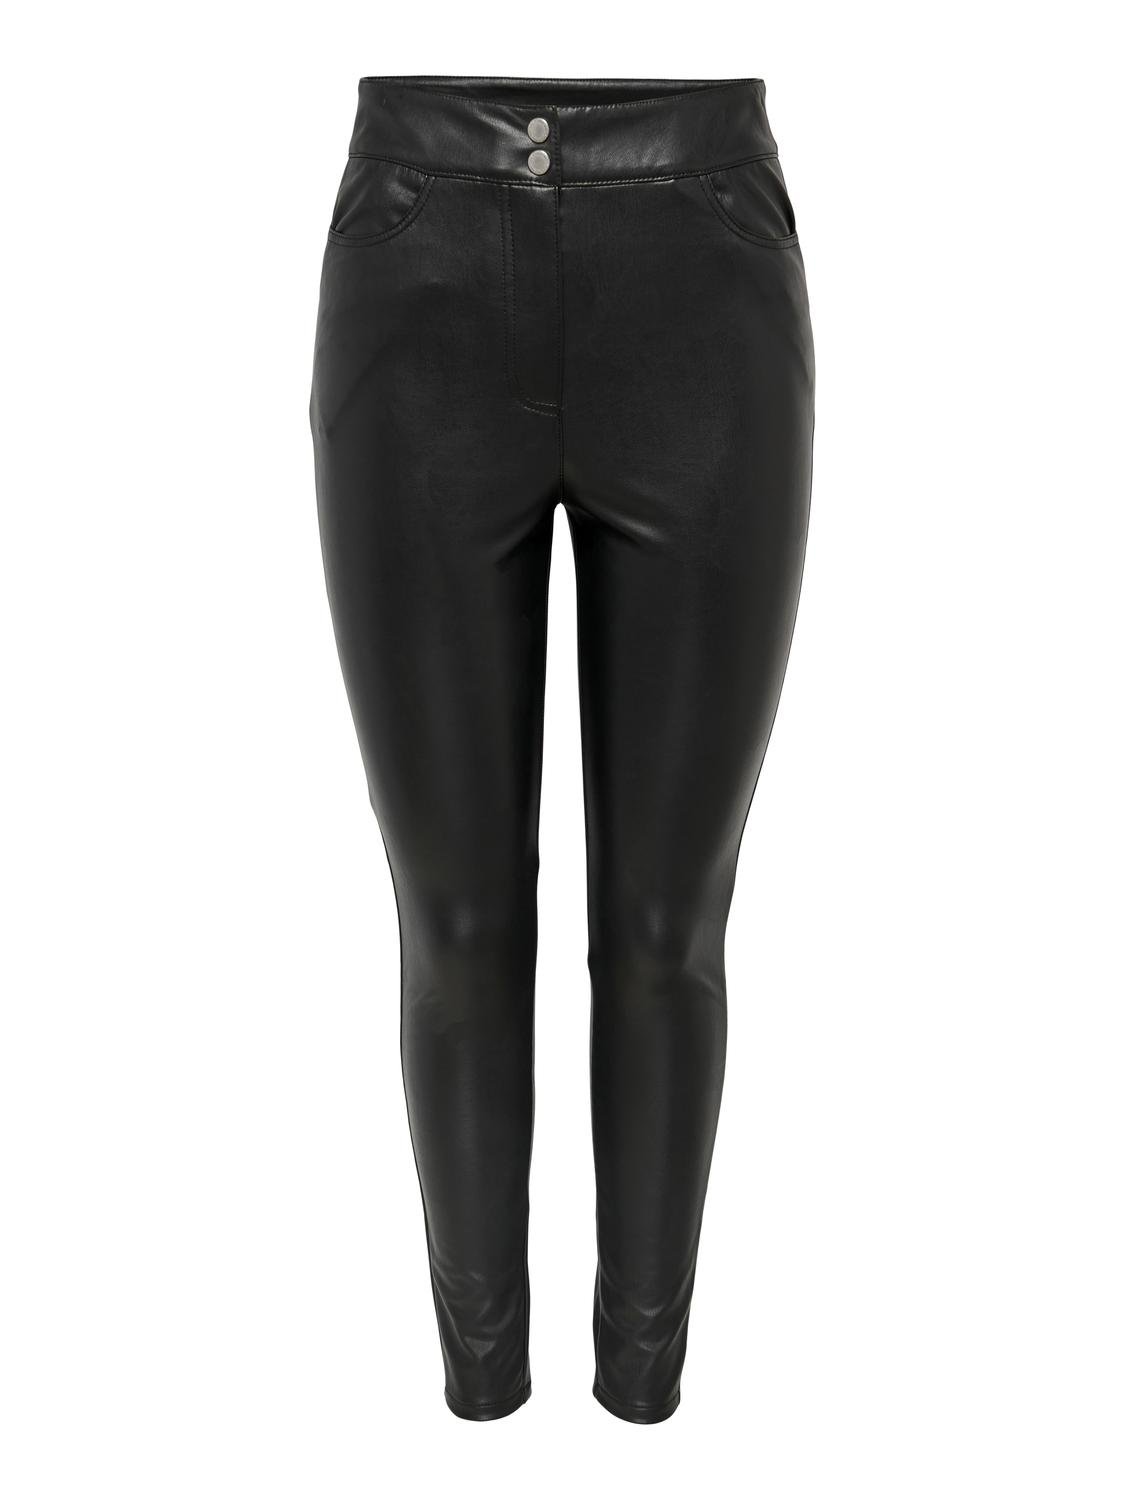 Tall Faux Leather High Waisted Leggings